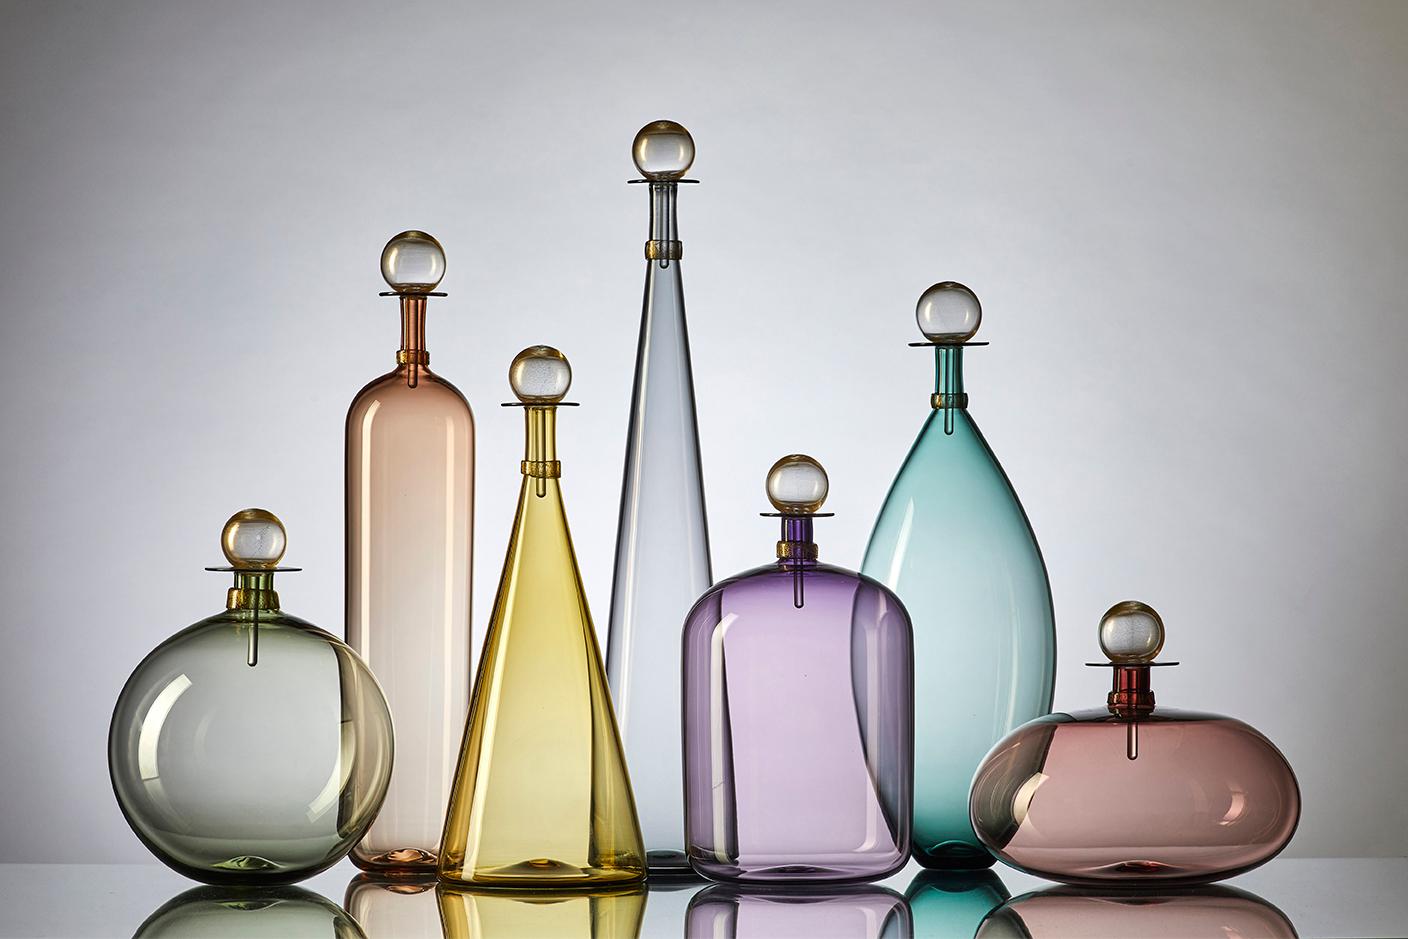 Contemporary Hand Blown Glass Decanter, Aquamarine Vase with Gold by Vetro Vero, in Stock